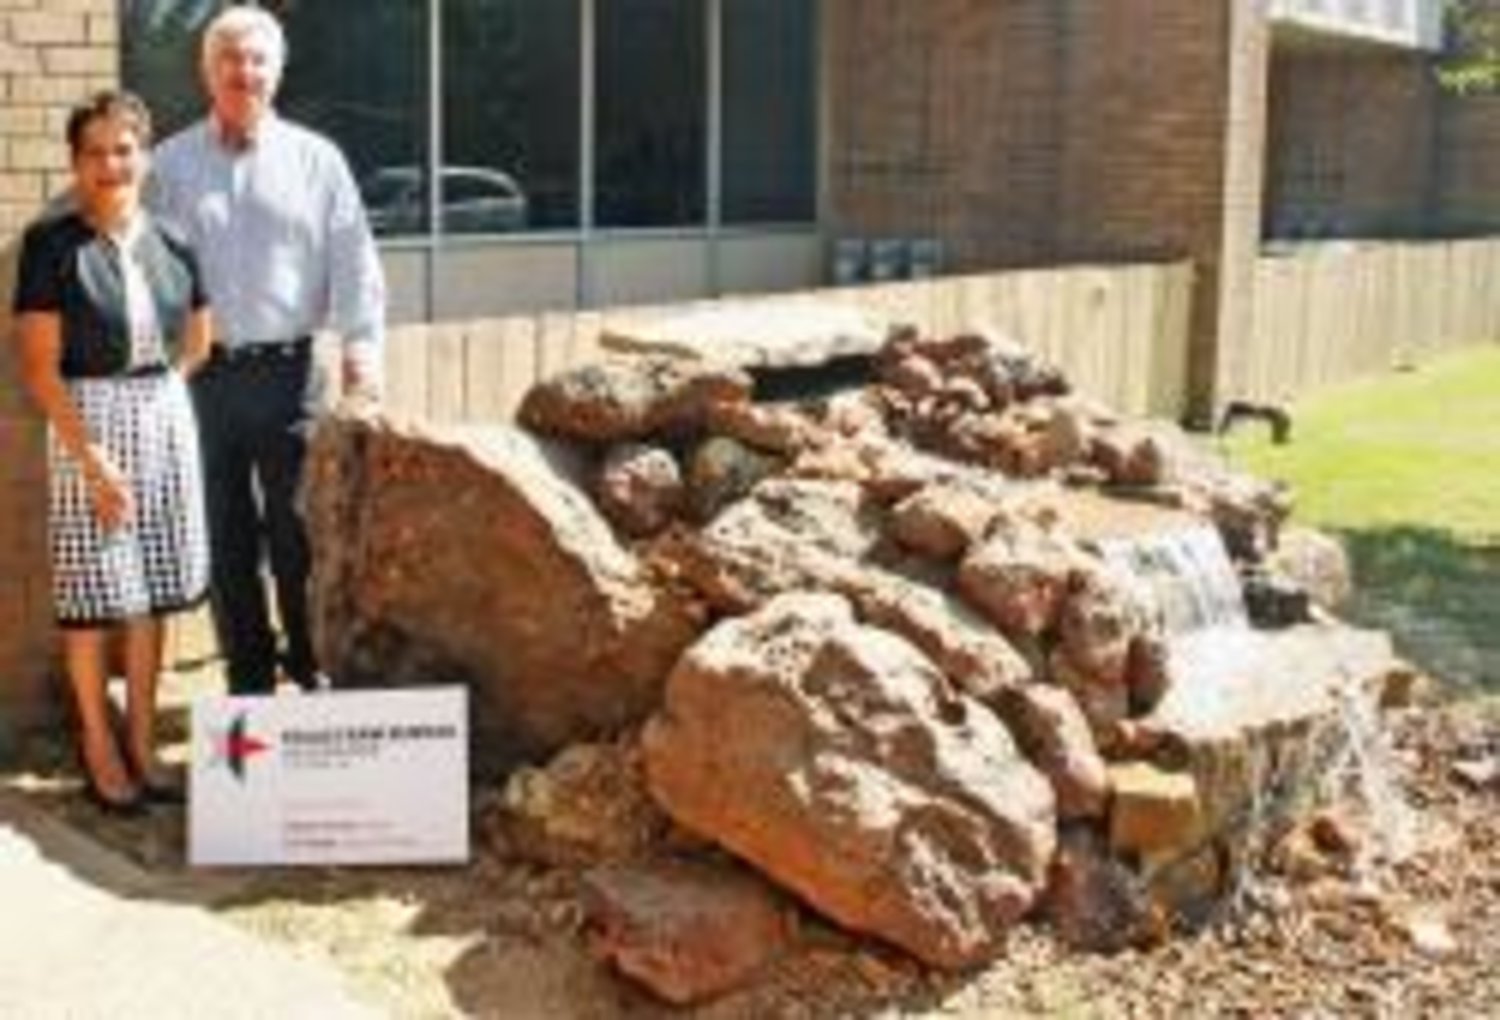 Debbie Skinner (left) and Tim Yeager (right) of Texas Farm Bureau Insurance stand next to the fountain they donated to Quitman Junior High School. The fountain was designed by Erica Fry.